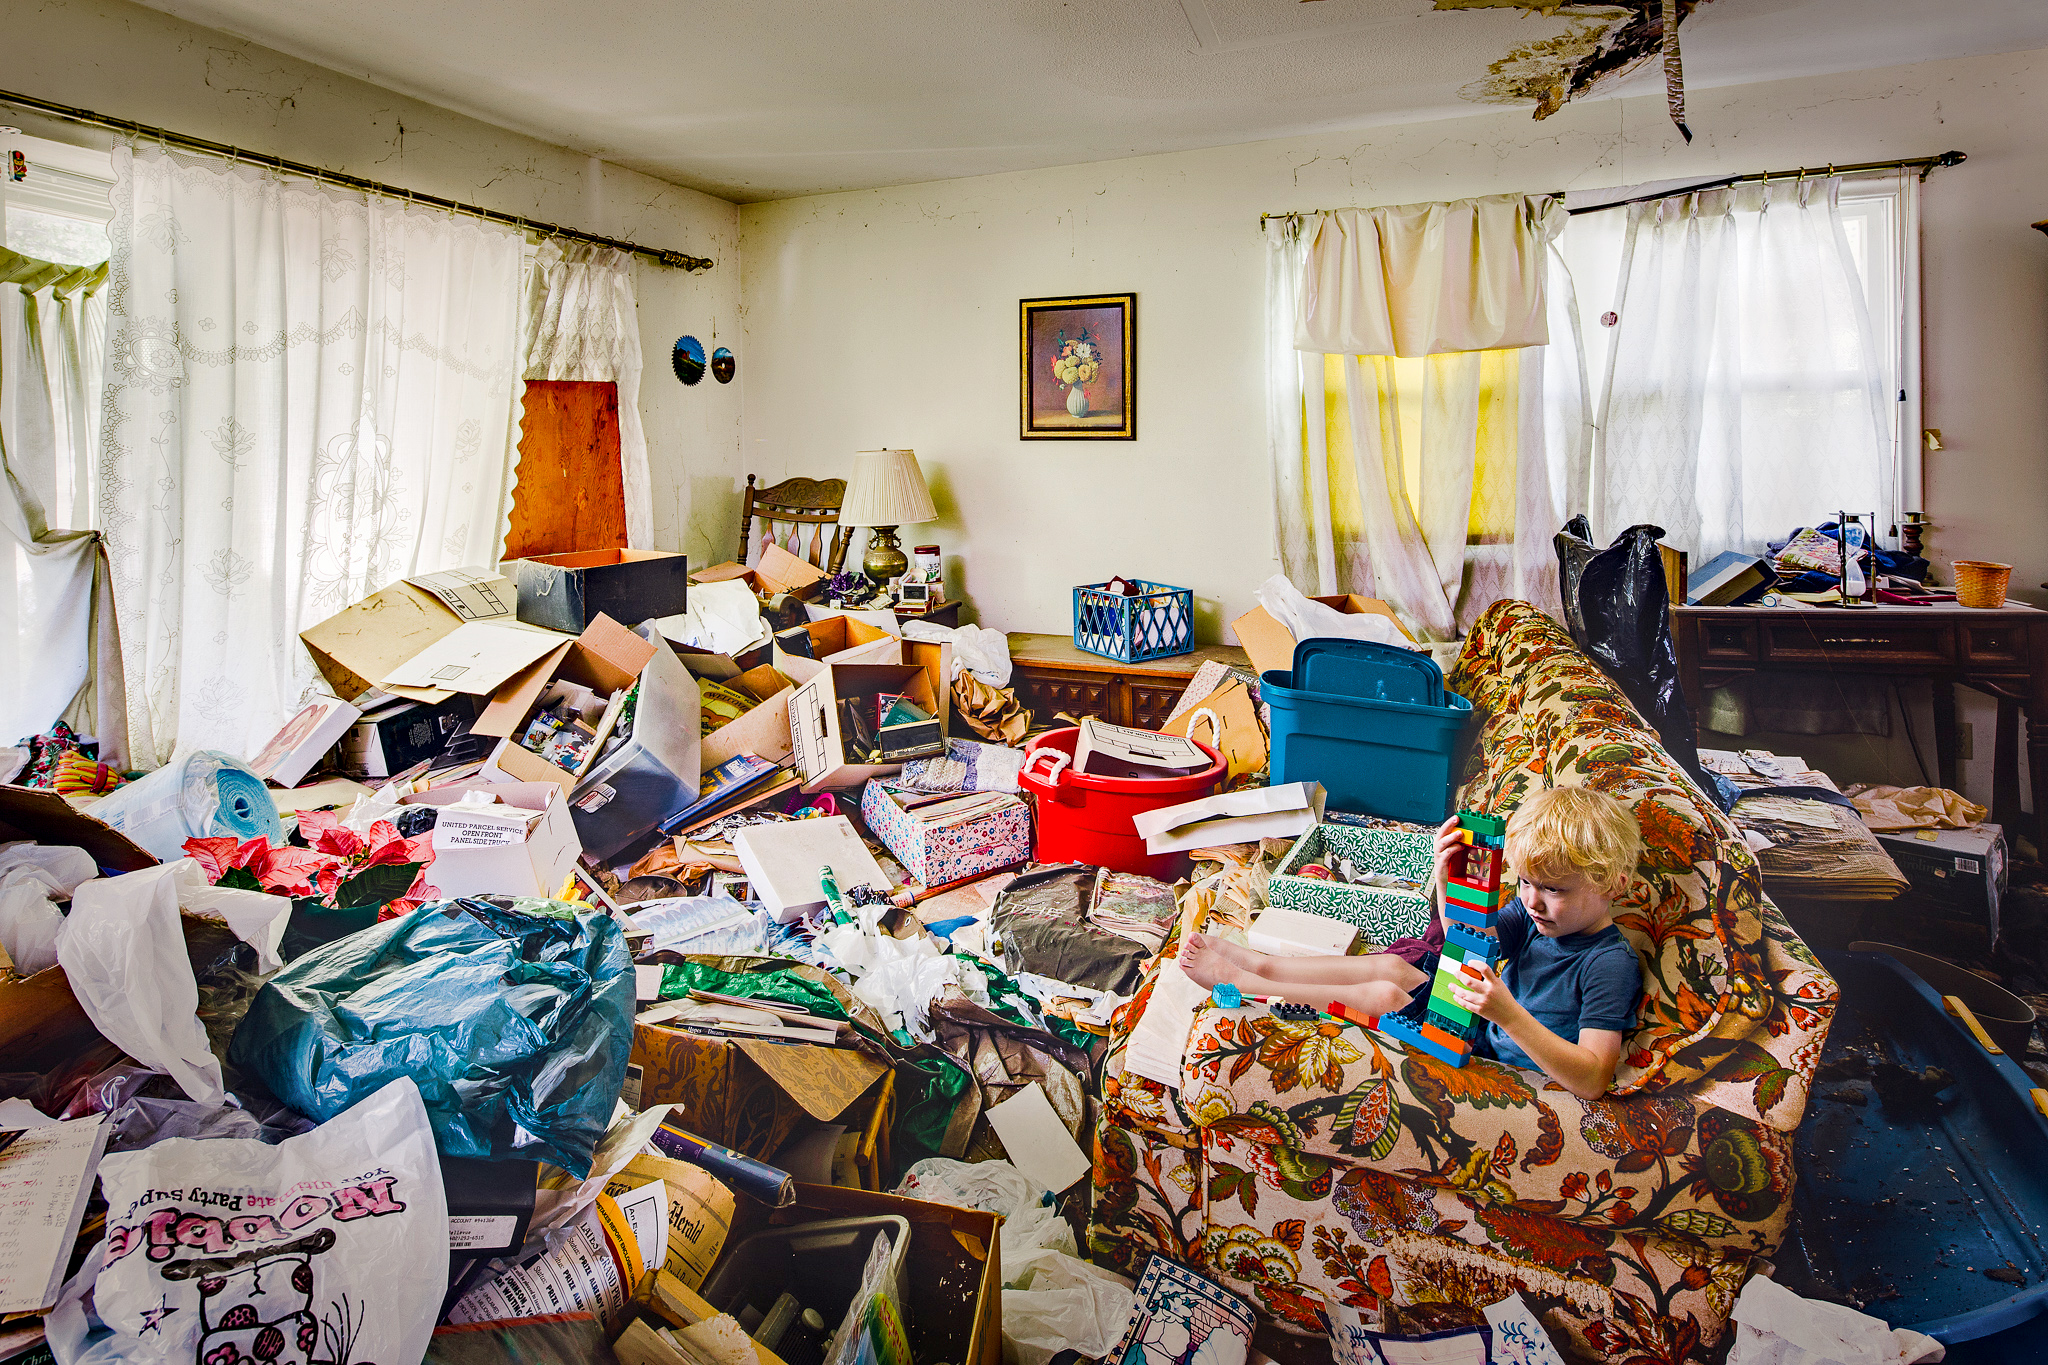 PHOTO: Geoff Johnson photographed what it's like growing up in a hoarder's house.